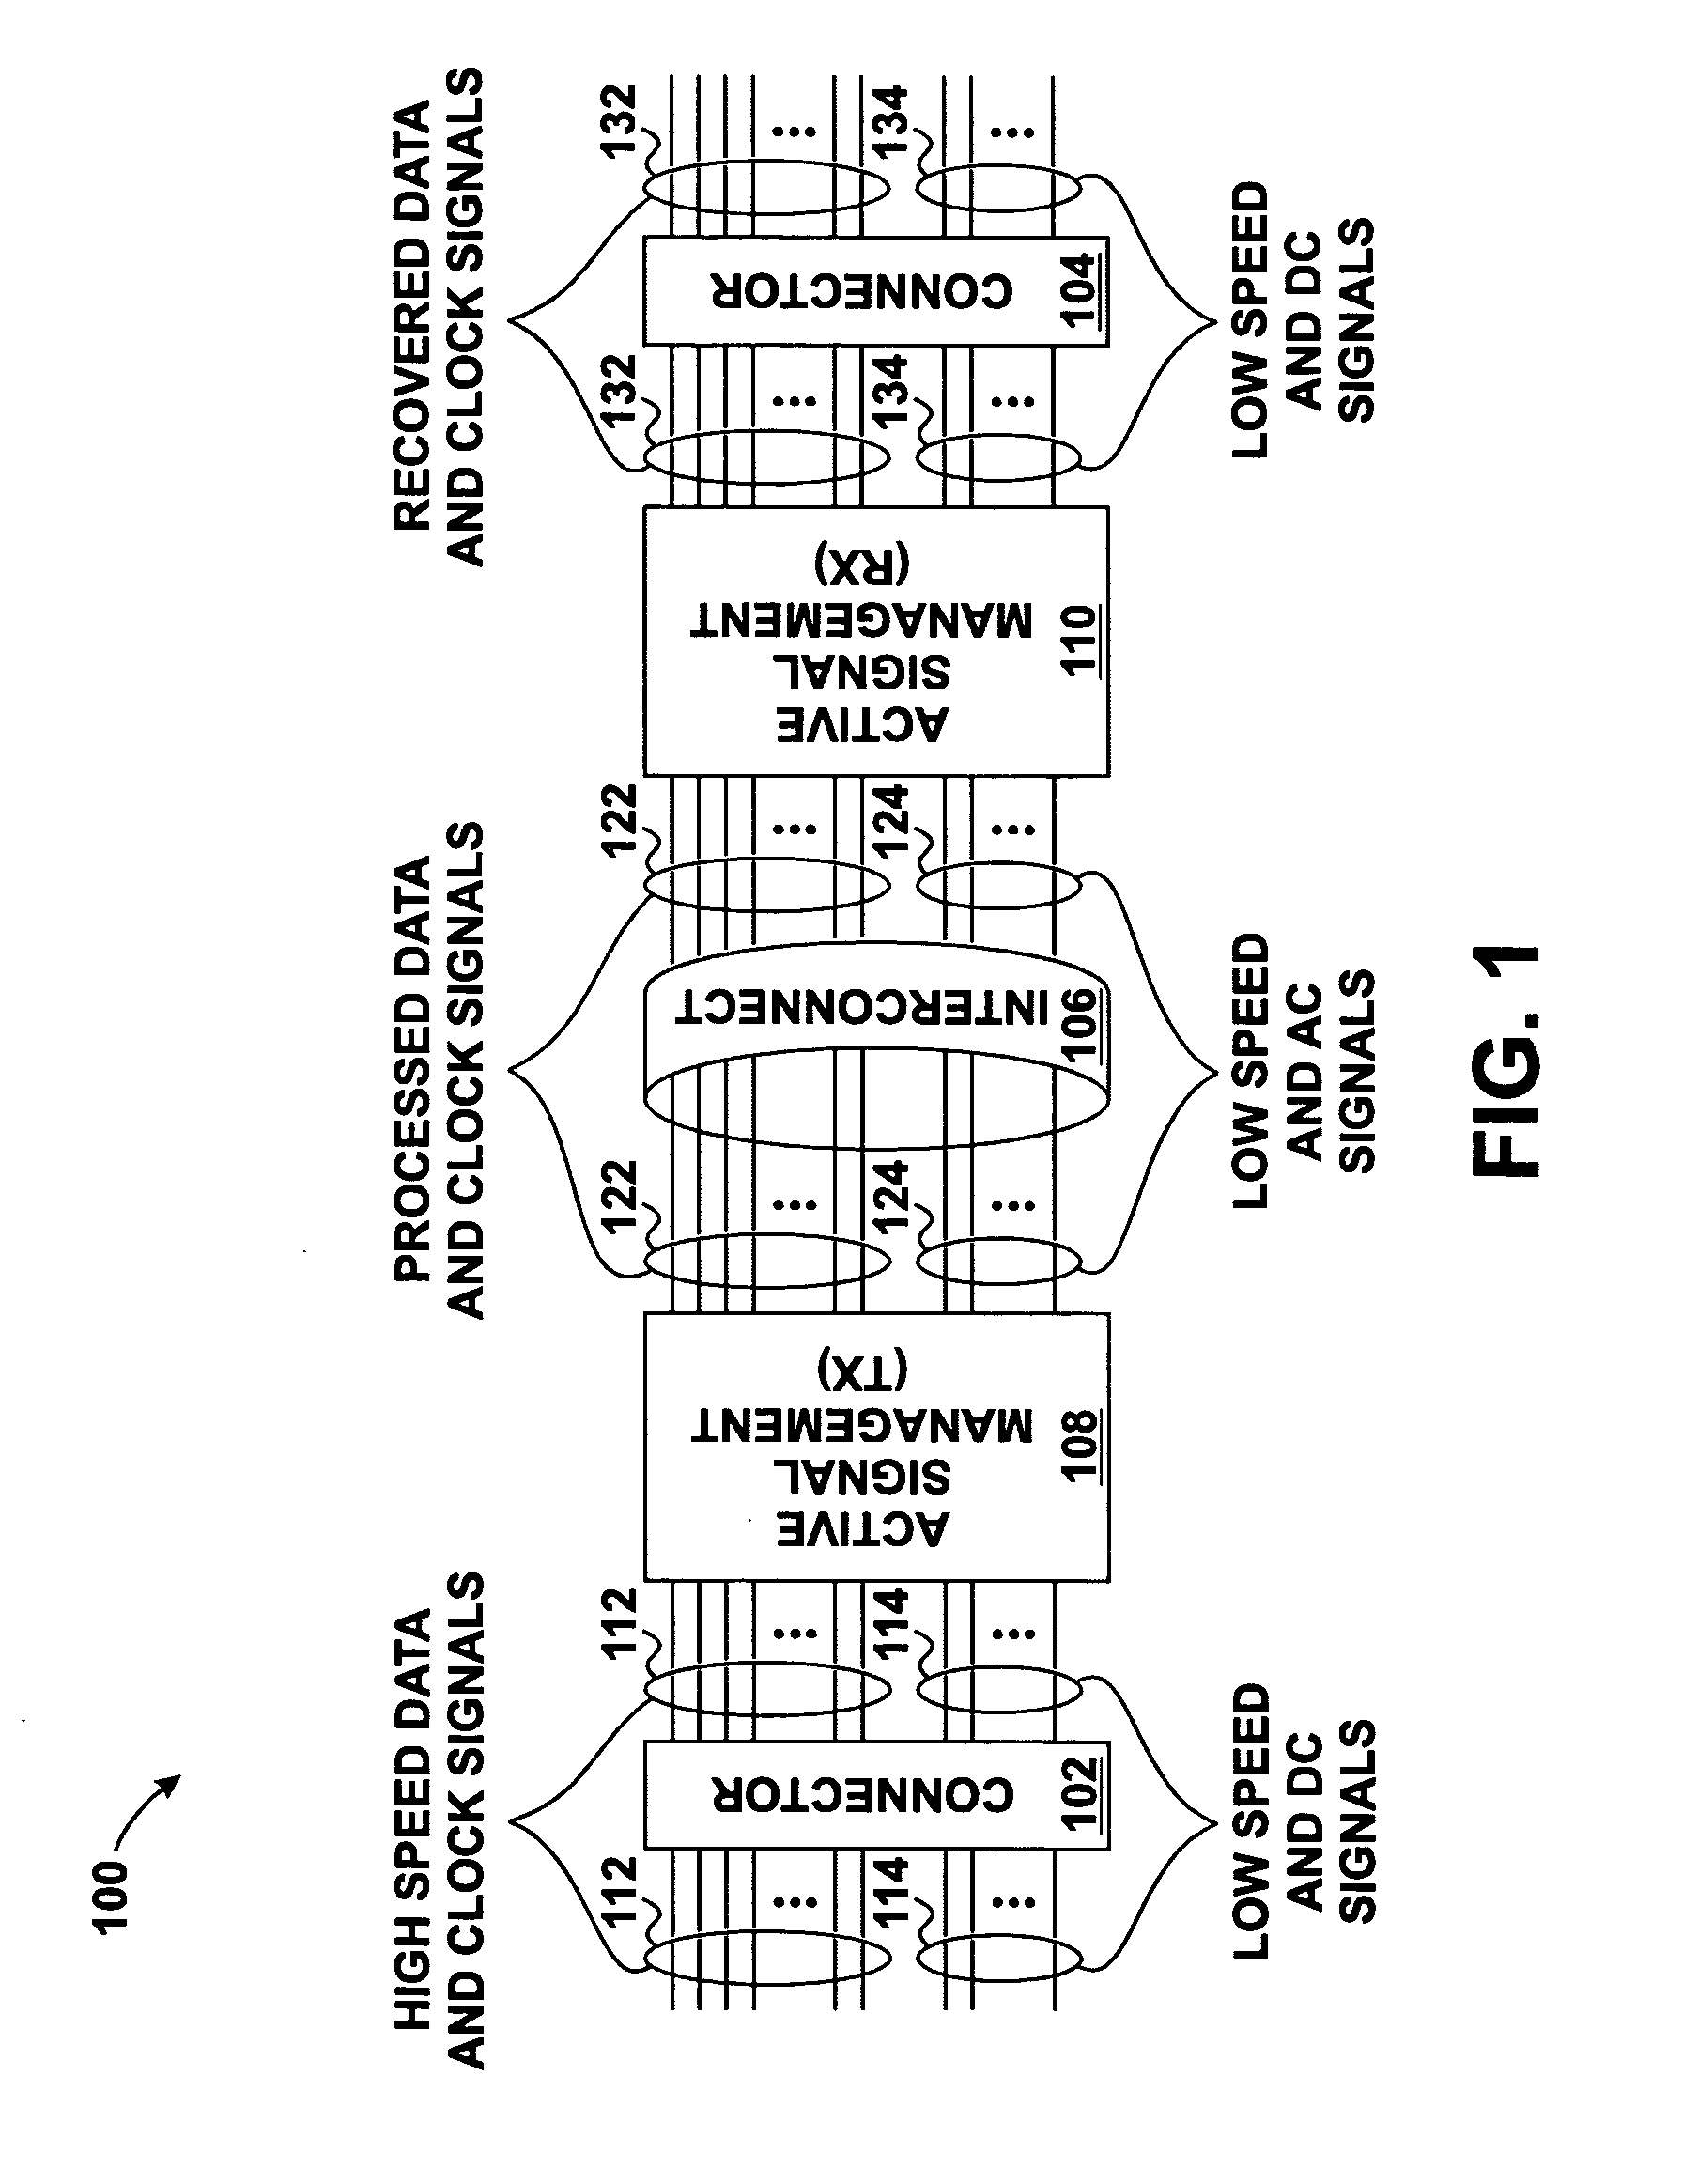 Method and apparatus for conversion between quasi differential signaling and true differential signaling